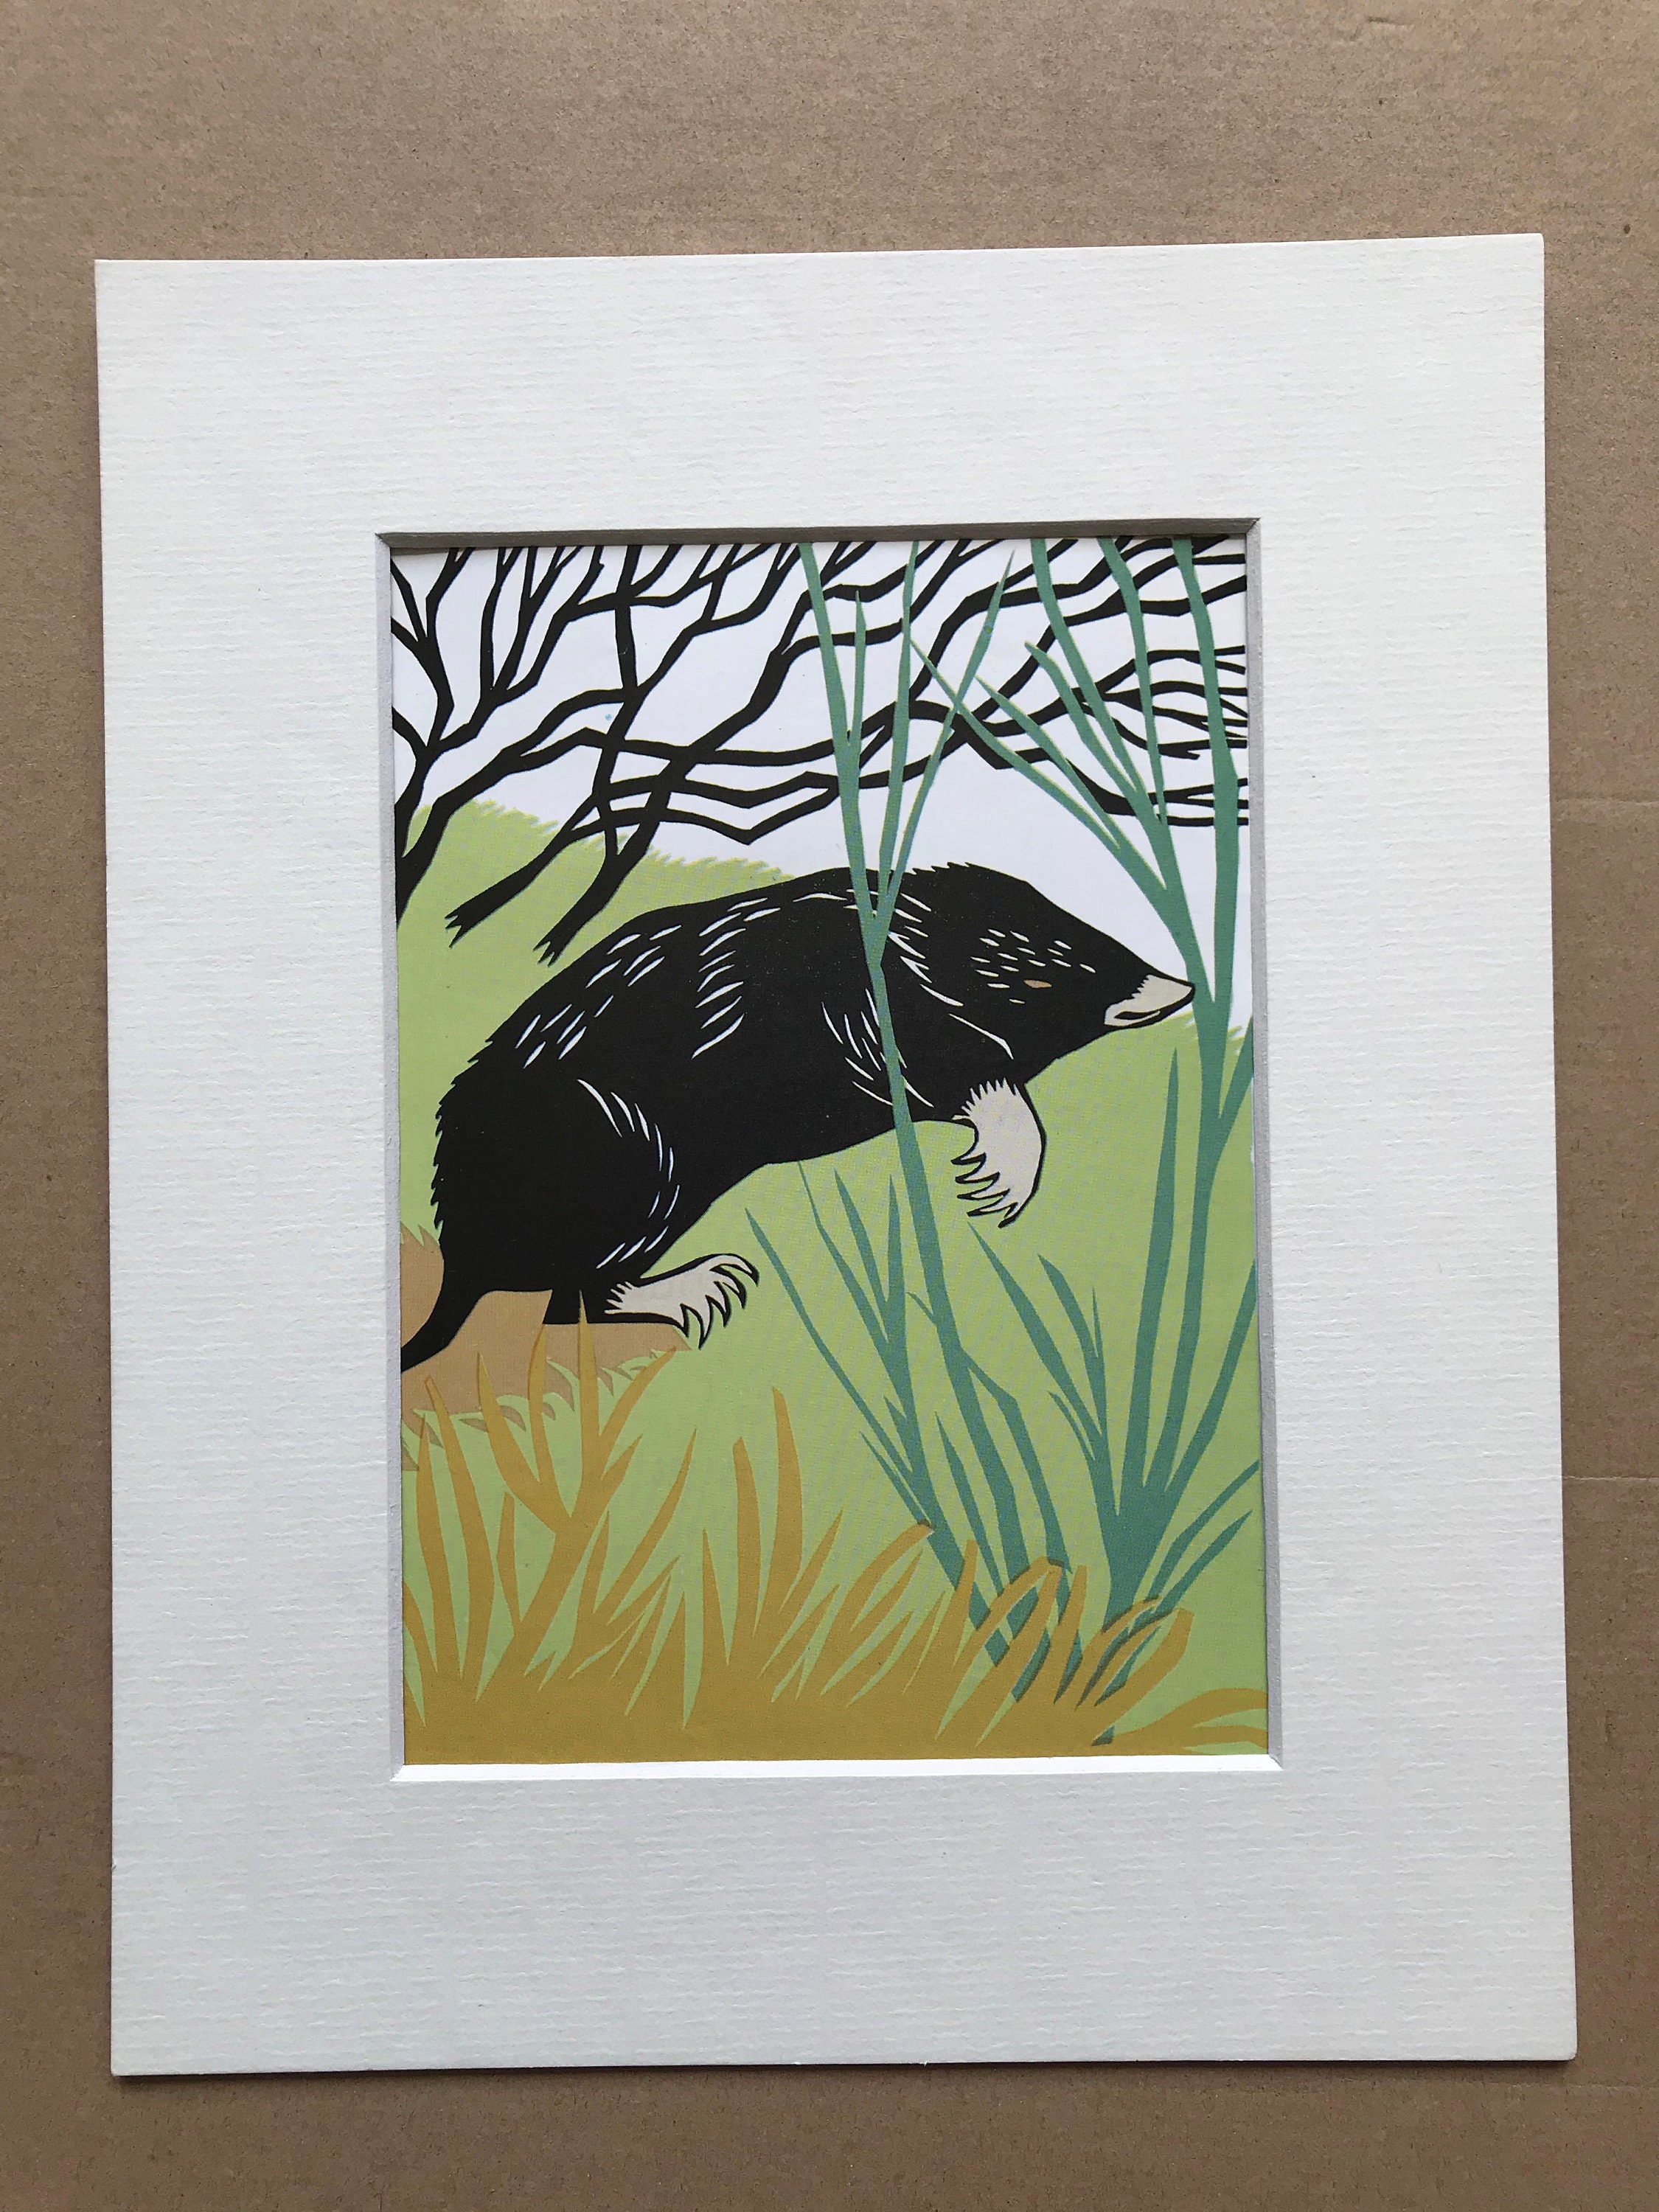 1958 Mole Original Vintage Illustration - Mounted and Matted - Paper ...